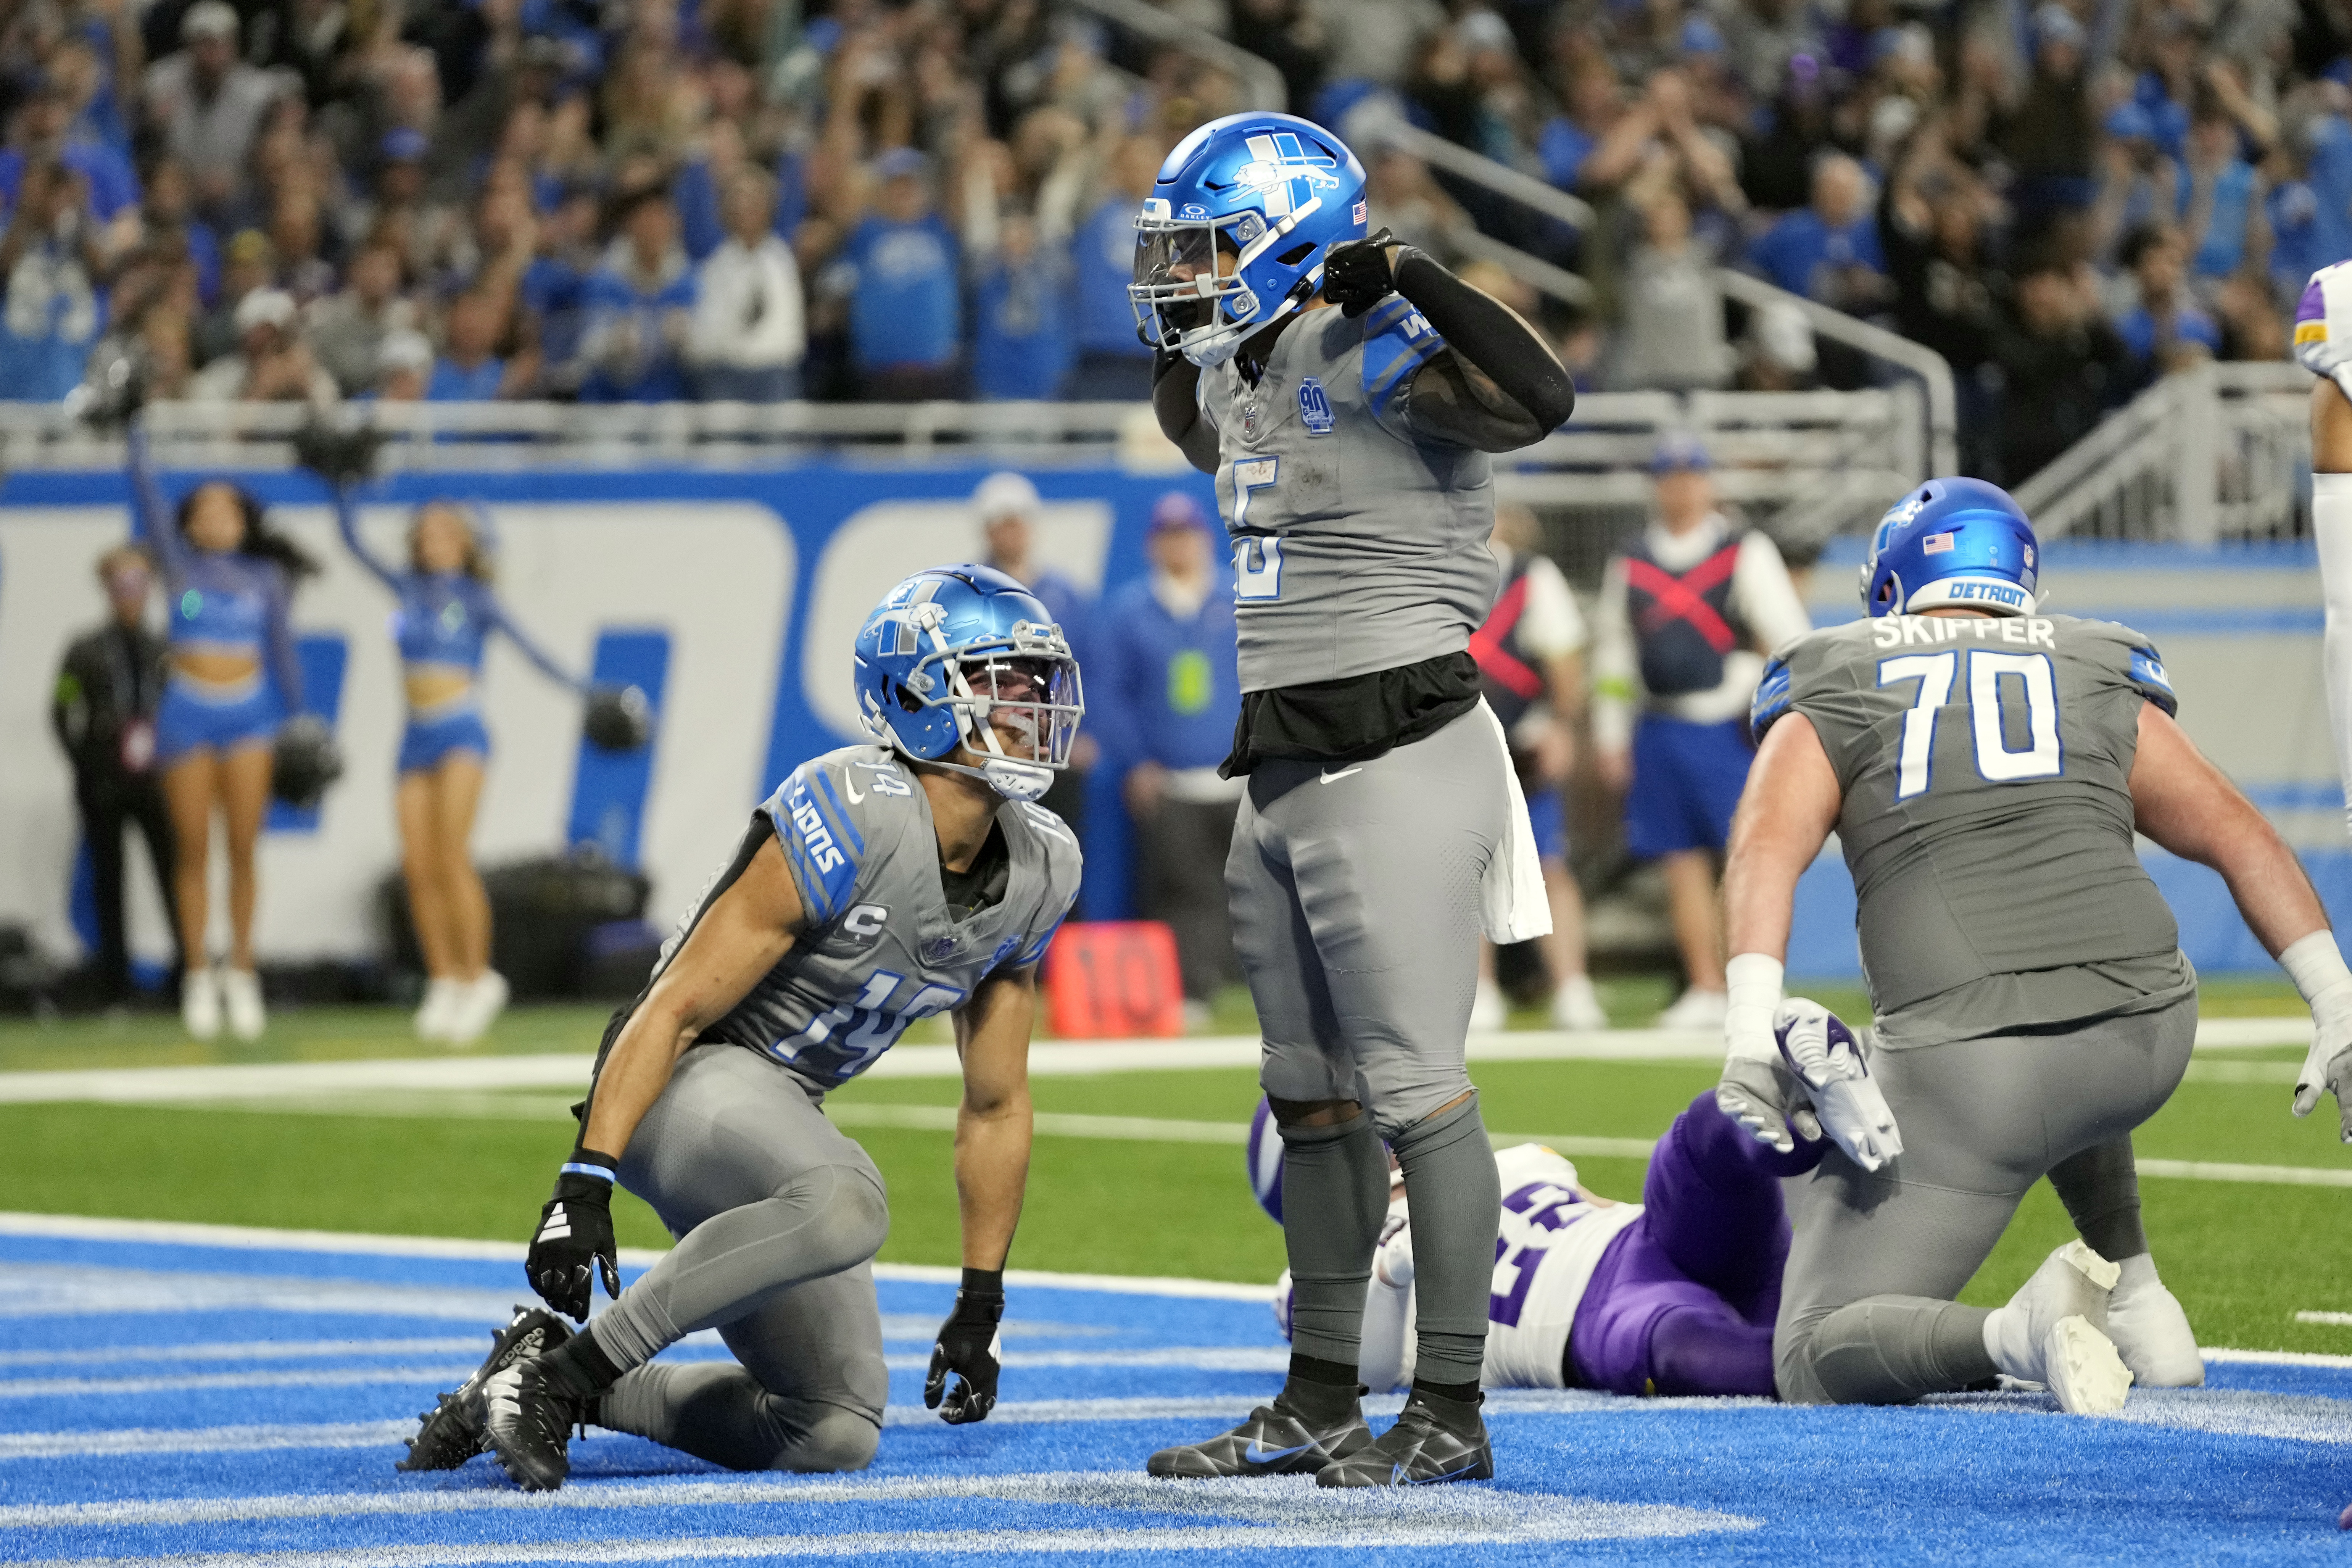 Detroit Lions not only got their first win. They won for Oxford